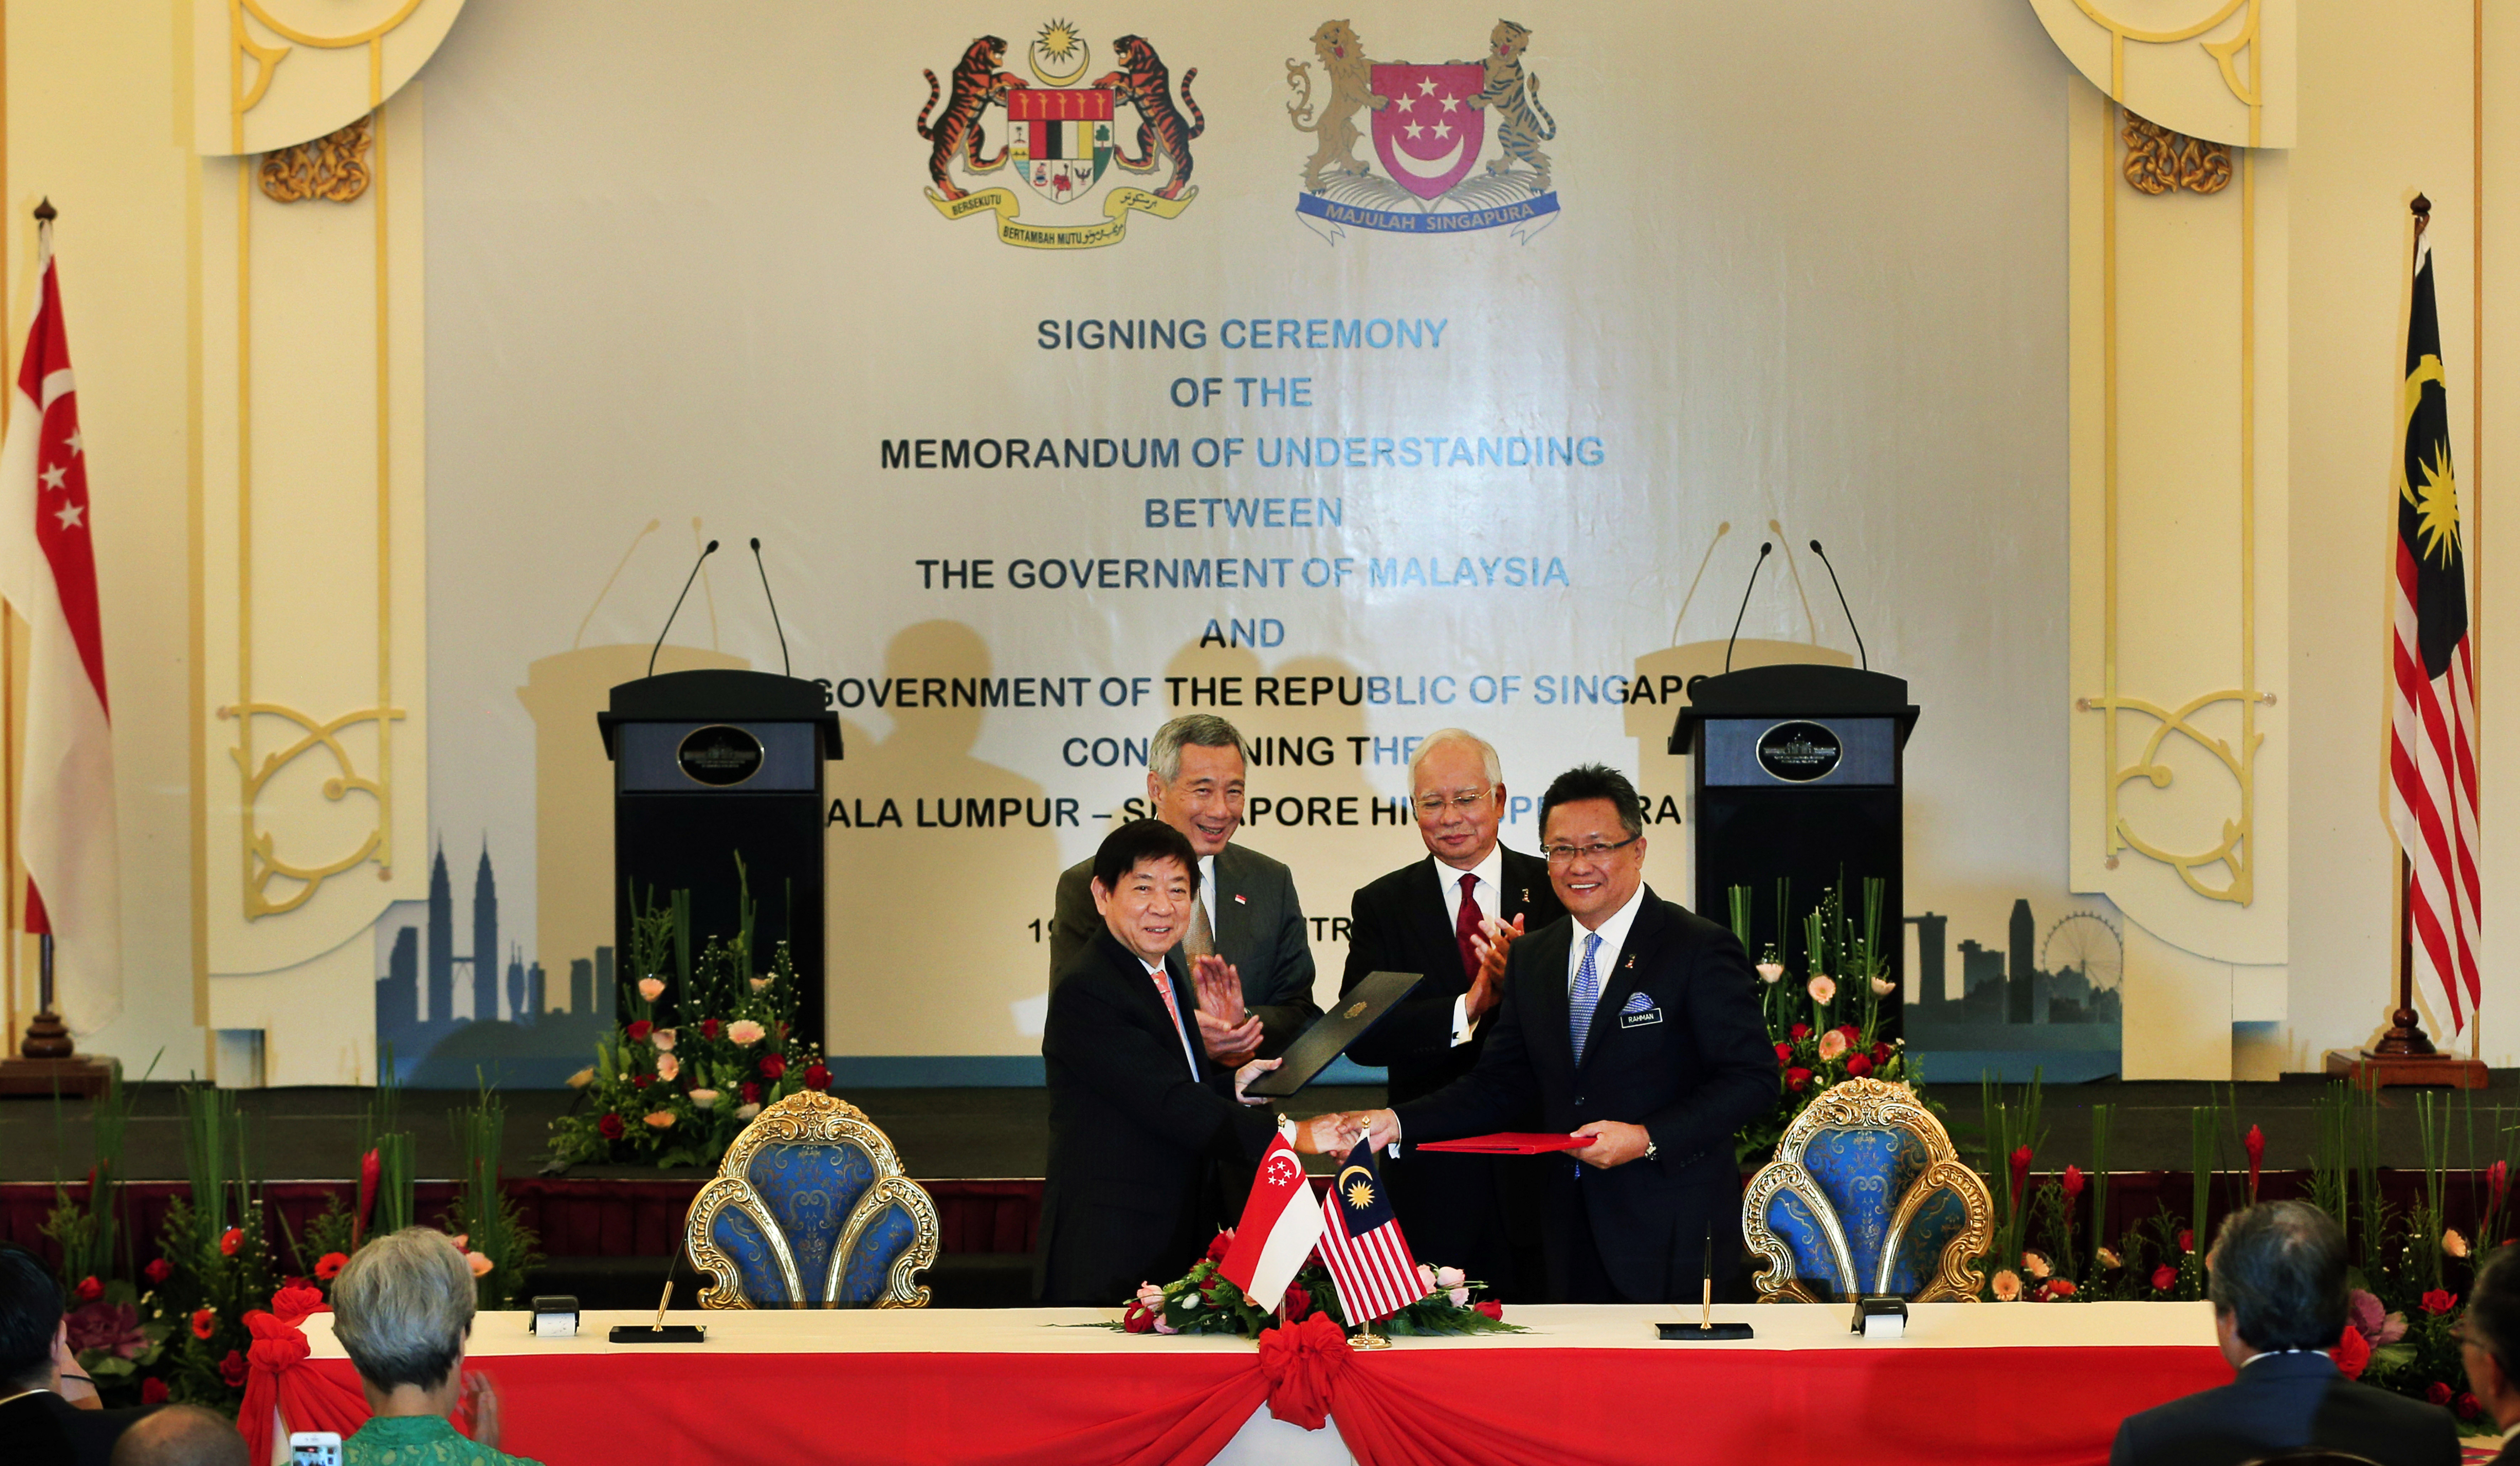 Signing of HSR MOU on 19 Jul 2016 (MCI Photo by Terence Tan)